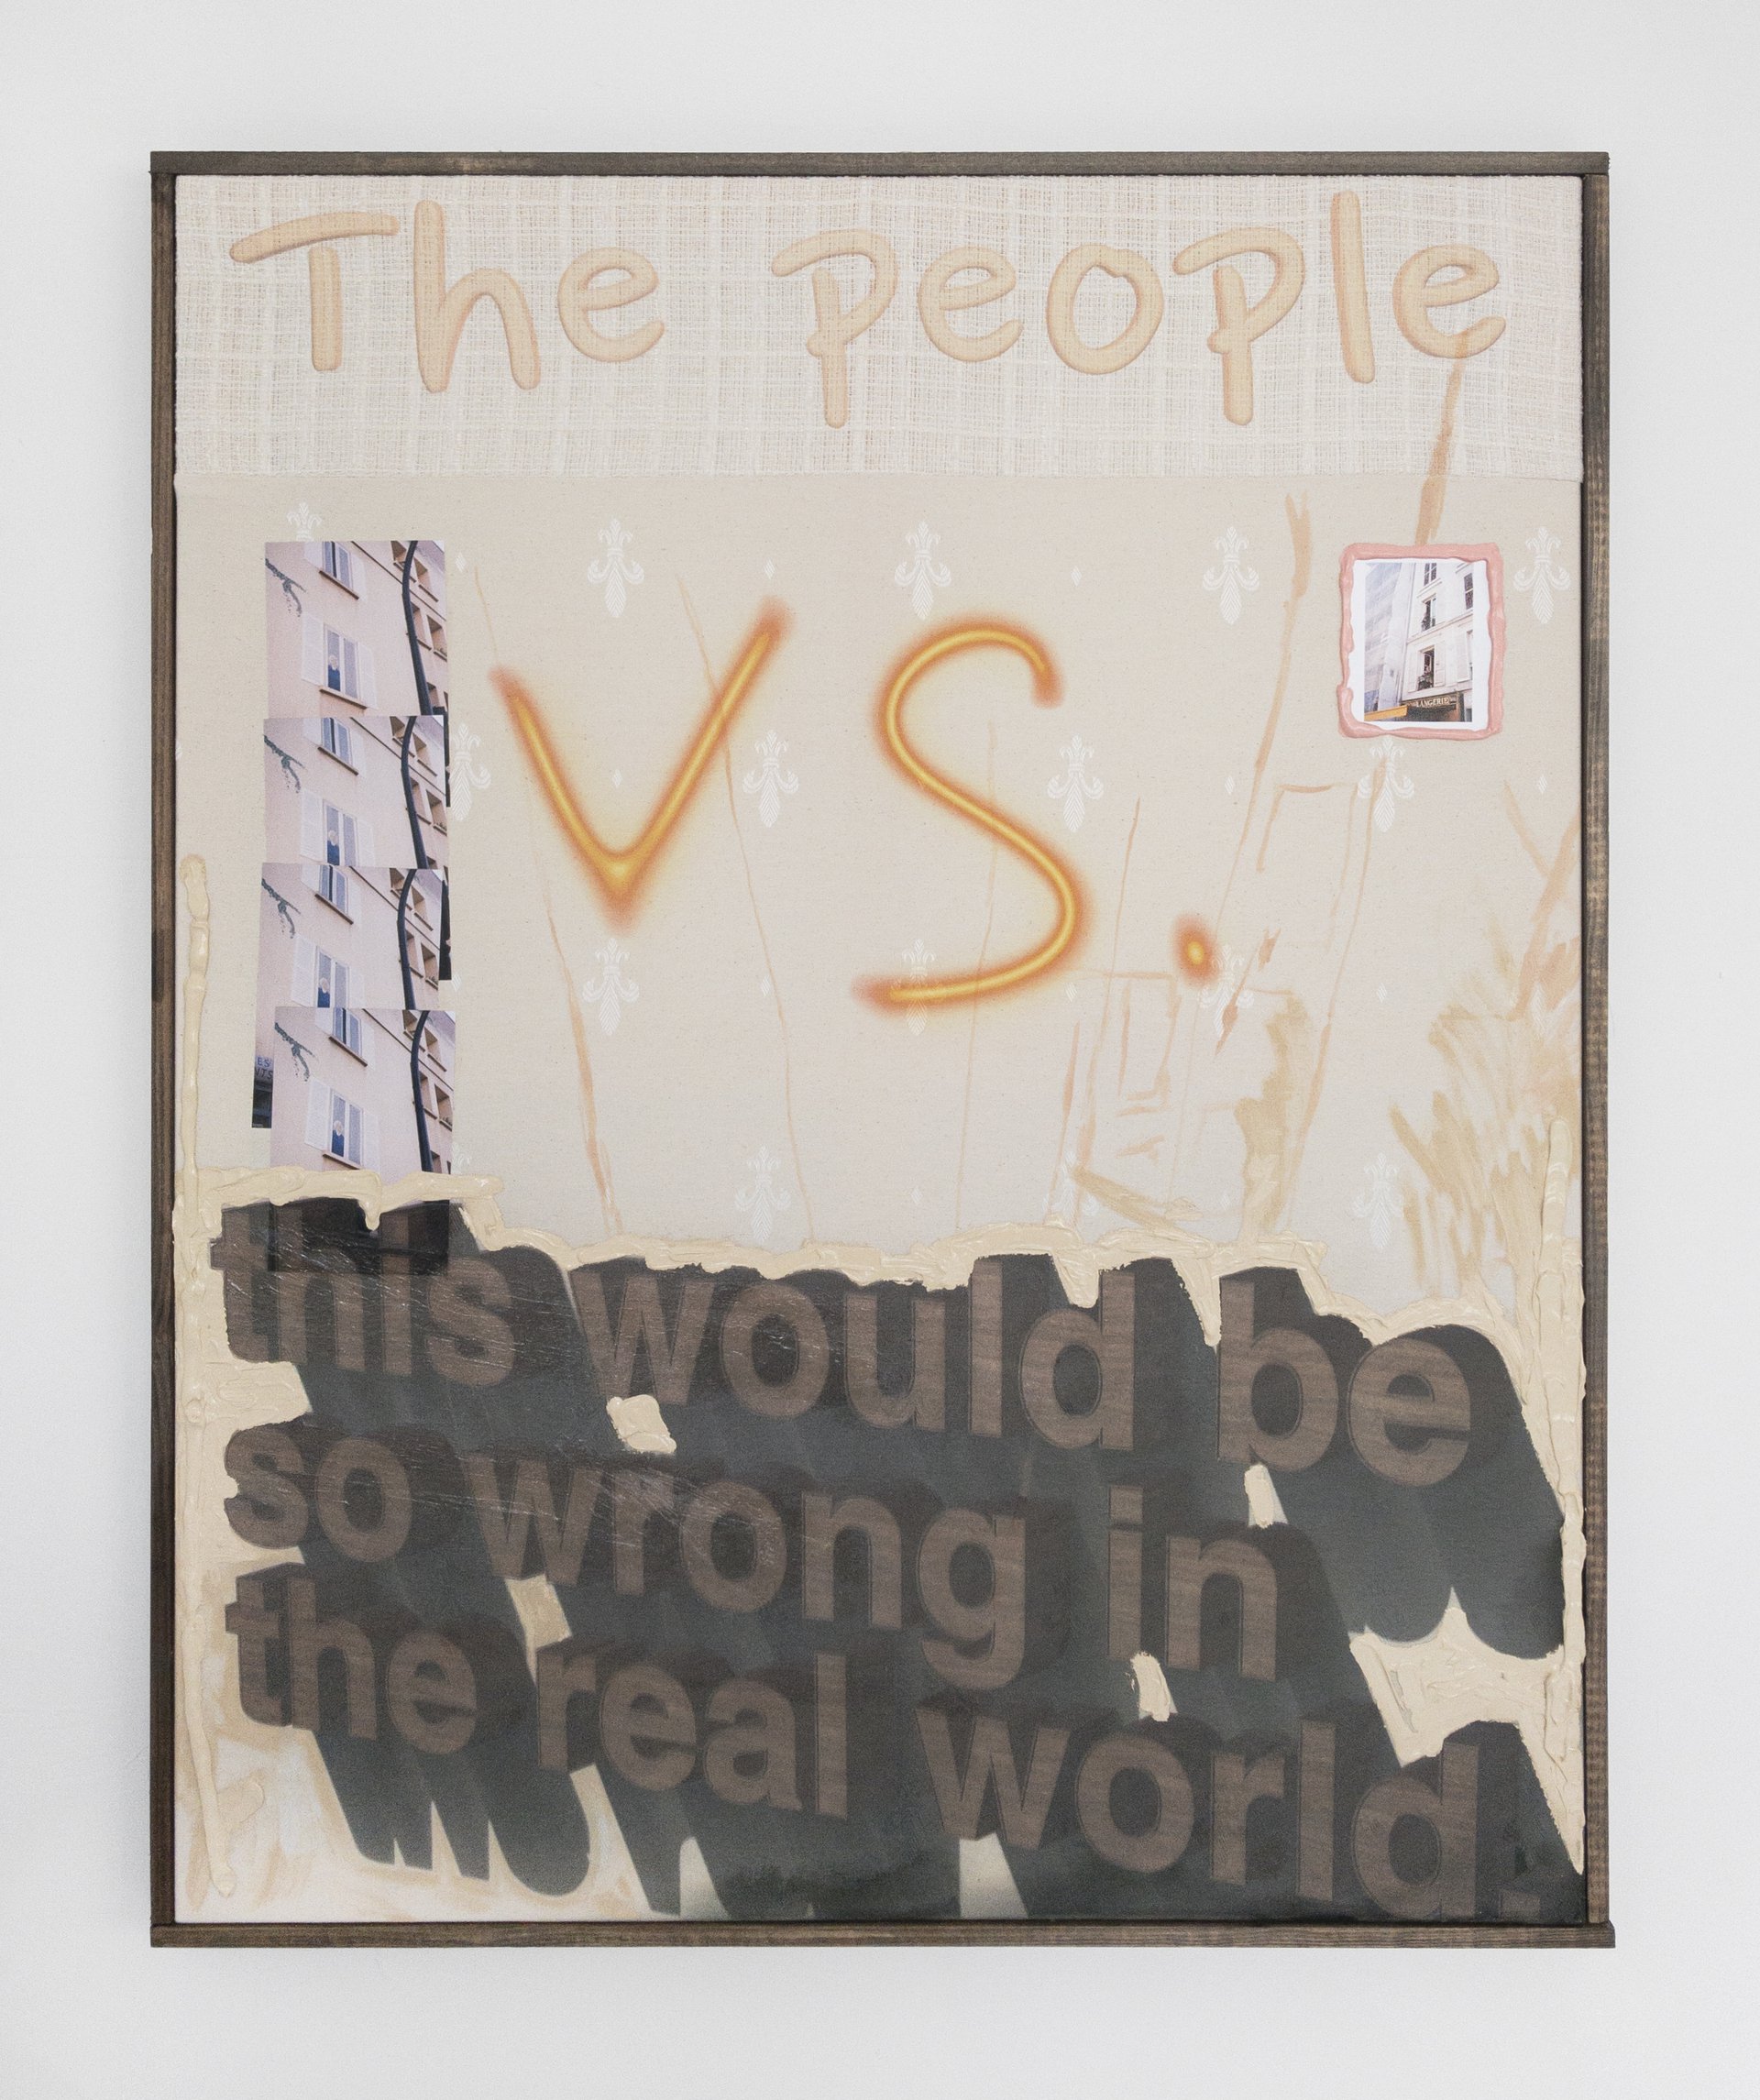 Philipp TimischlThe people VS. this would be so wrong in the real world, 2020Acrylic paint, UV-direct print and photos on fabrics, stained wooden frame100 x 80 cm